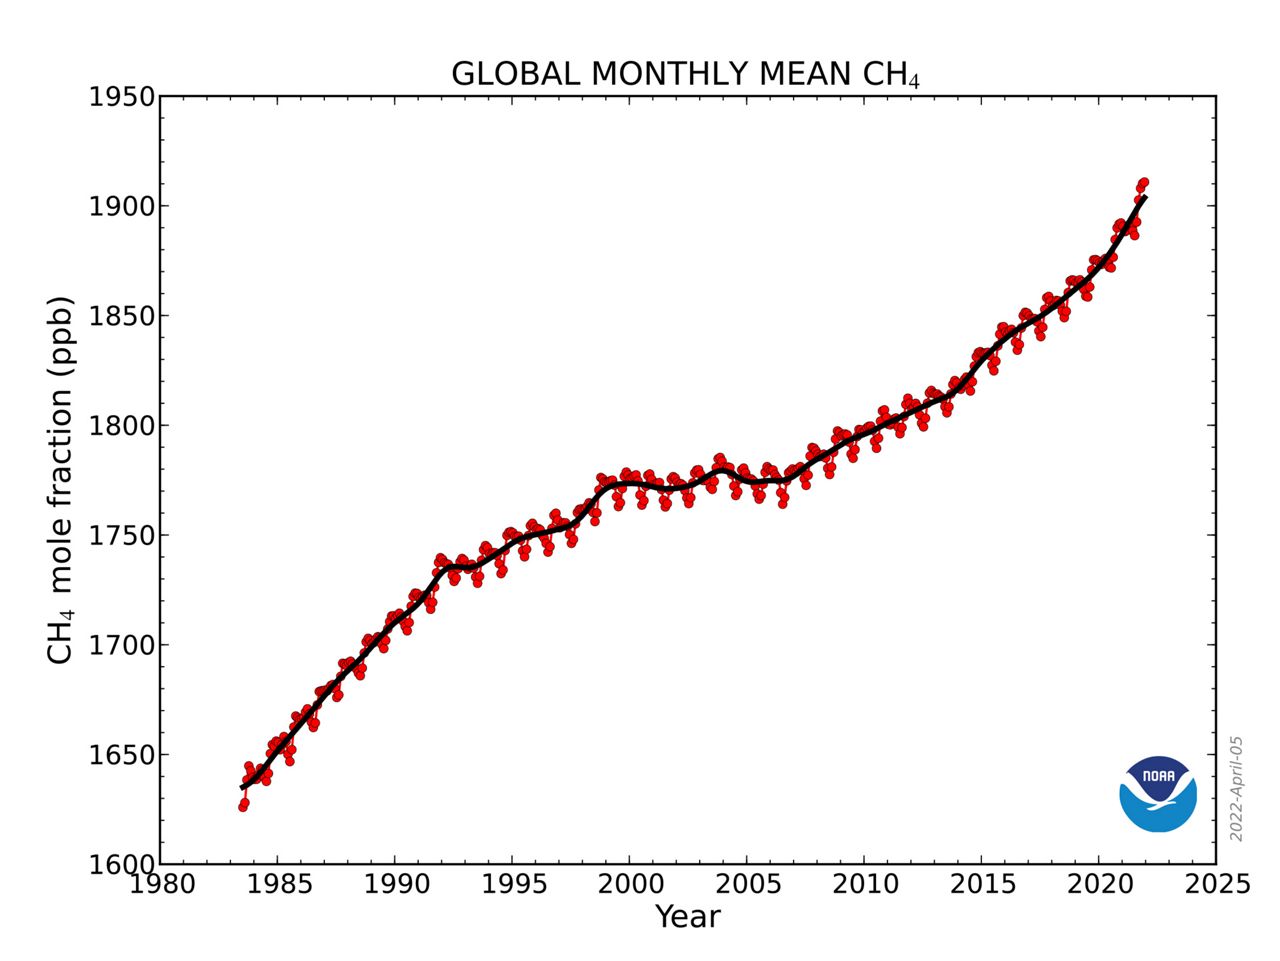 2021 set records for greenhouse gases